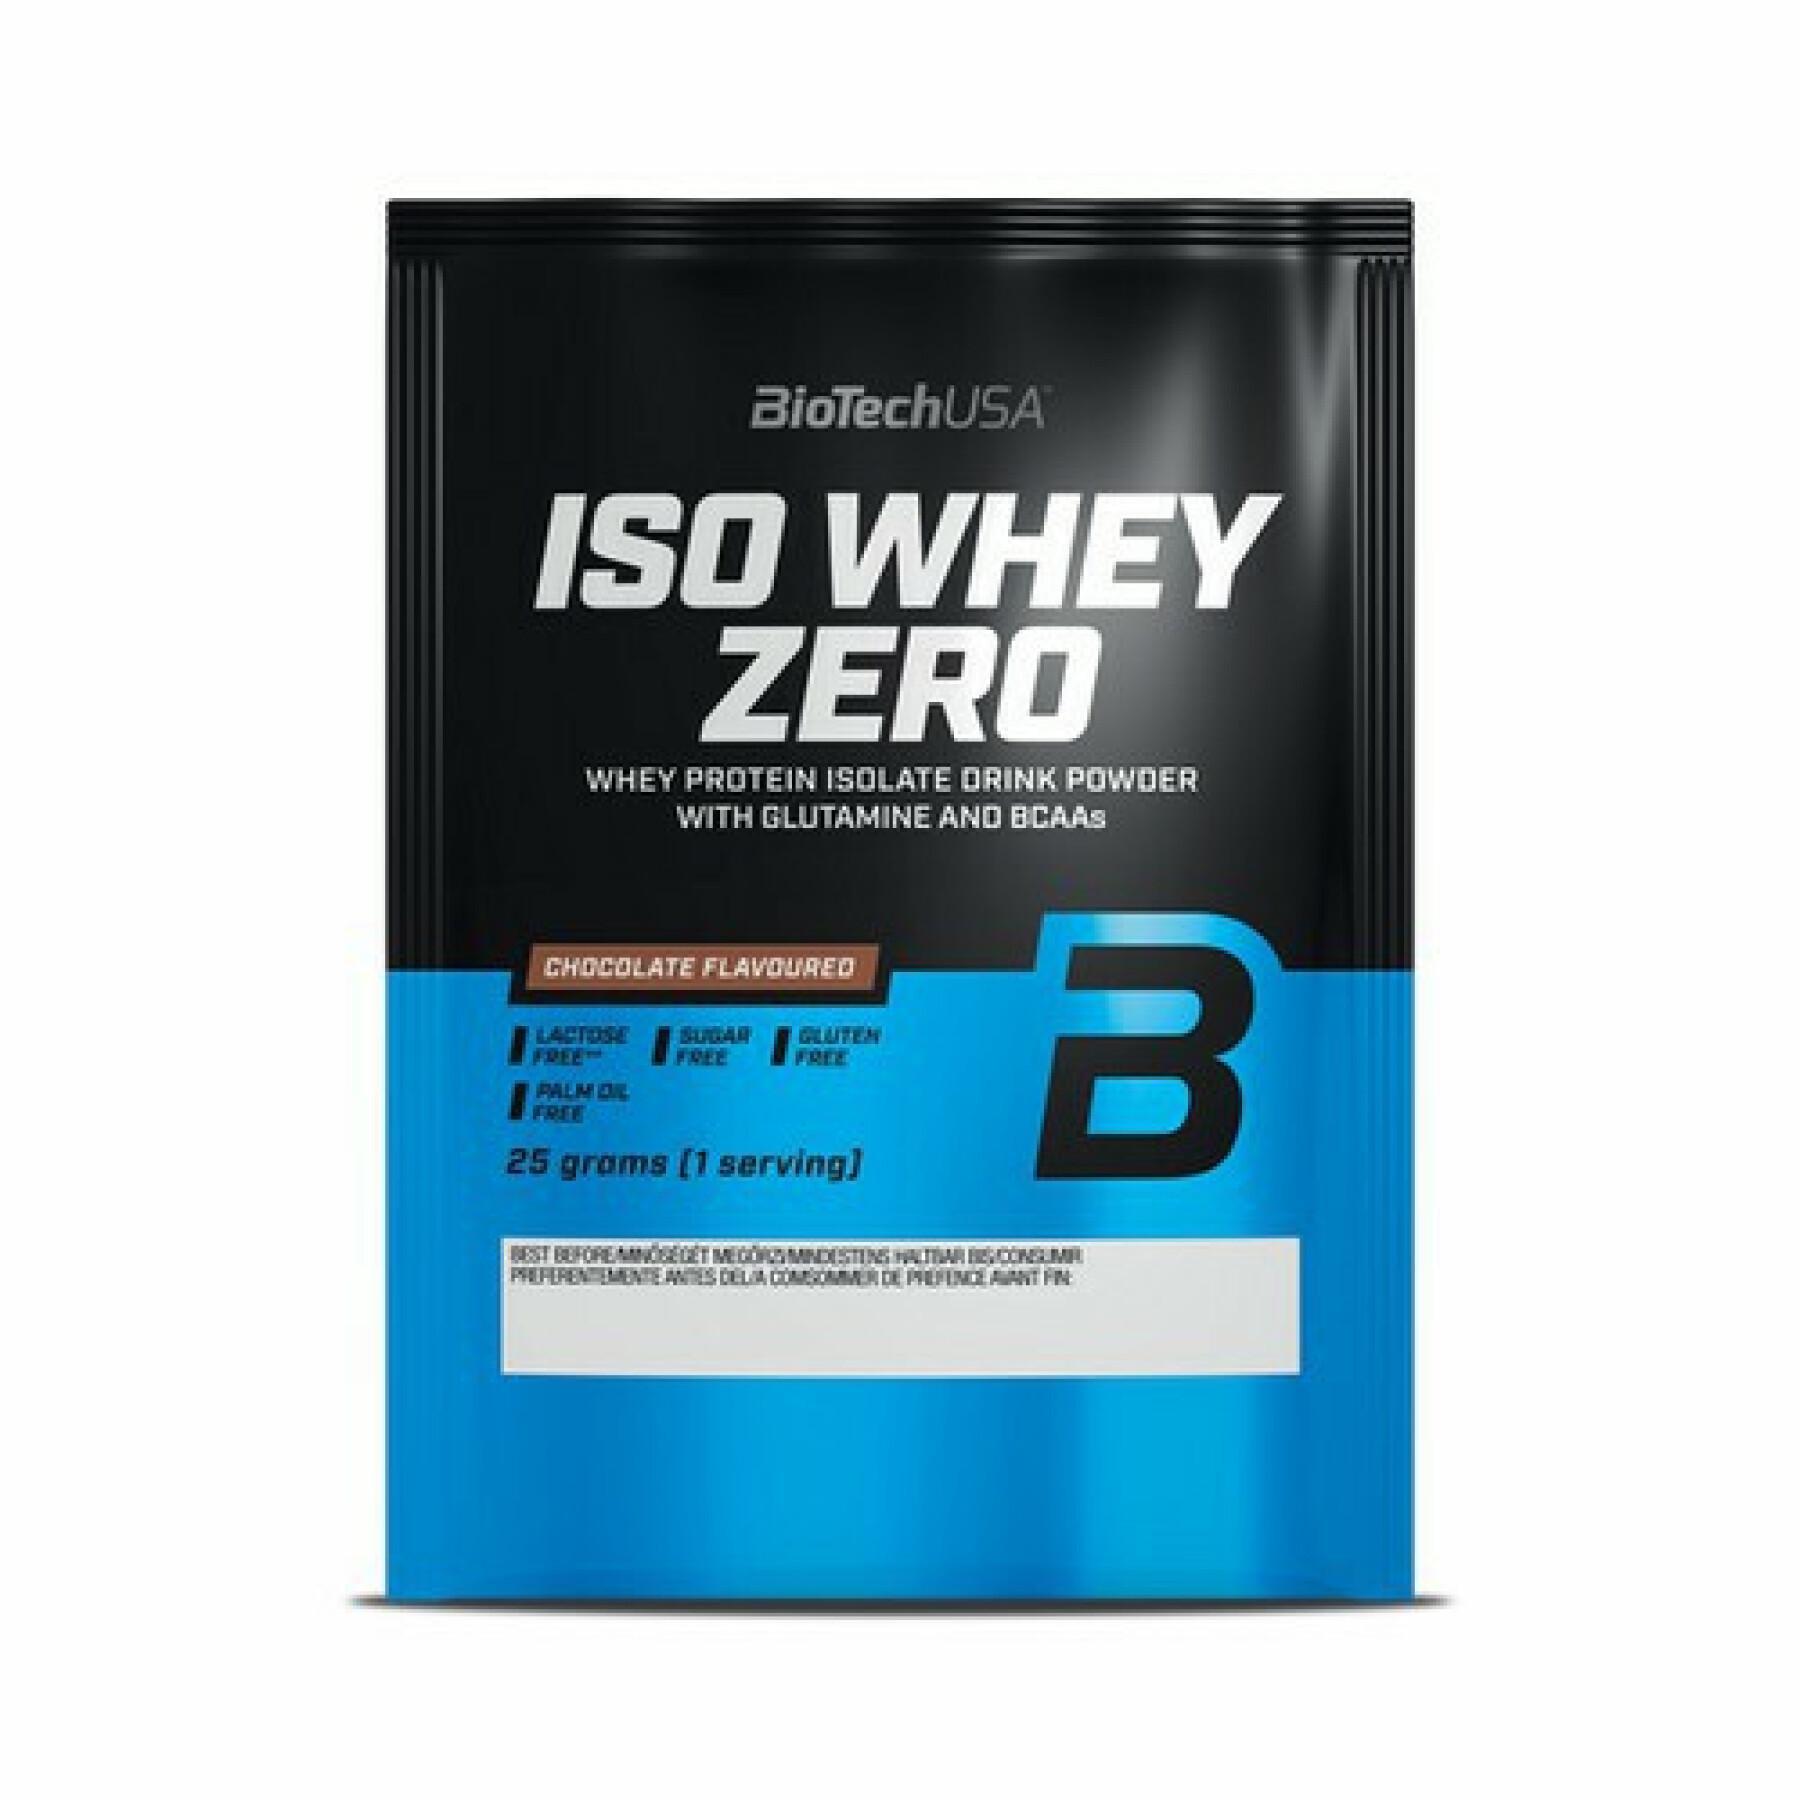 50 packets of lactose-free protein Biotech USA iso whey zero - Chocolate - 25g